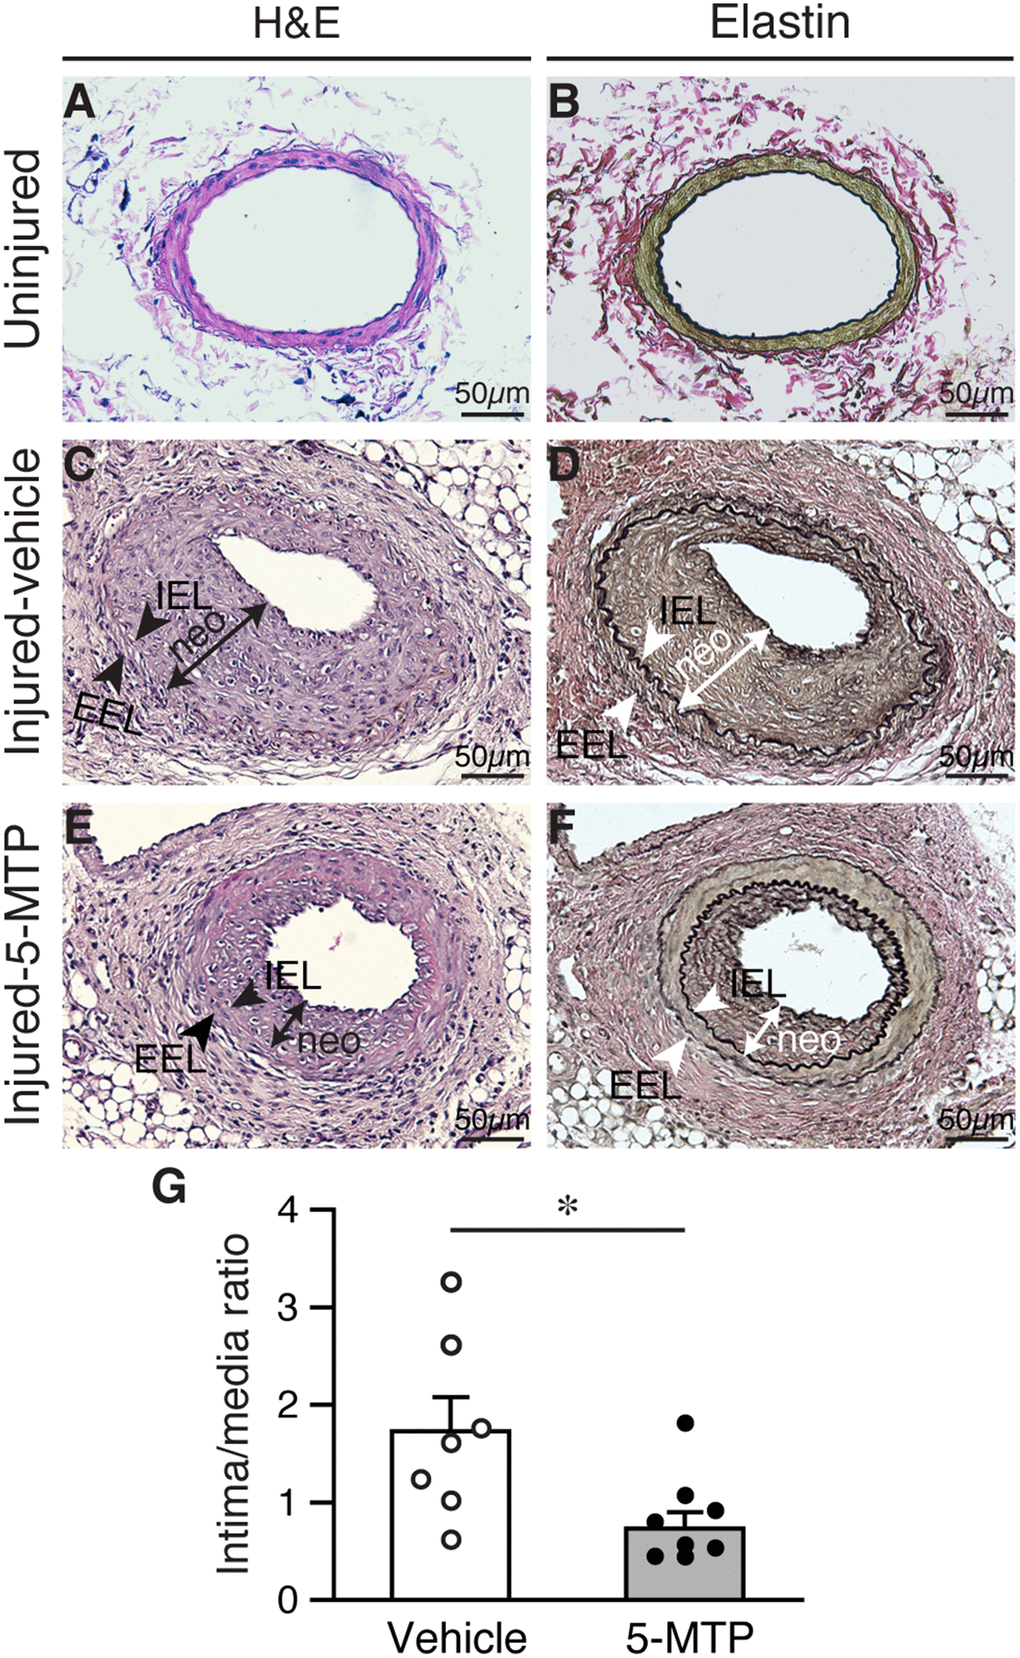 5-MTP reduces arterial denudation-induced intimal hyperplasia. Mice were subjected to femoral artery denudation injury and treated with PBS or 5-MTP. Vessels were harvested 4 weeks later. (A–B) Uninjured vessel cross sections were stained with H&E (A) or Verhoeff’s staining for elastin (B). (C–F) Sections from injured arteries from vehicle (C–D) or 5-MTP-treated (E–F) mice were stained for H&E (C and E) or elastin stain (D and F). Representative sections are shown. Arrowheads indicates internal elastic lamina (IEL) and external elastic lamina (EEL), respectively, while a line with arrowhead at both ends delineates neointima (neo). (G) Quantitative morphometric analysis of intimal and medial area and expressed as intima/media ratio in injured vehicle- (1.73±0.35, n=7) and 5-MTP-treated (0.73±0.17, n=9) mice (*p=0.0076 vs. vehicle).